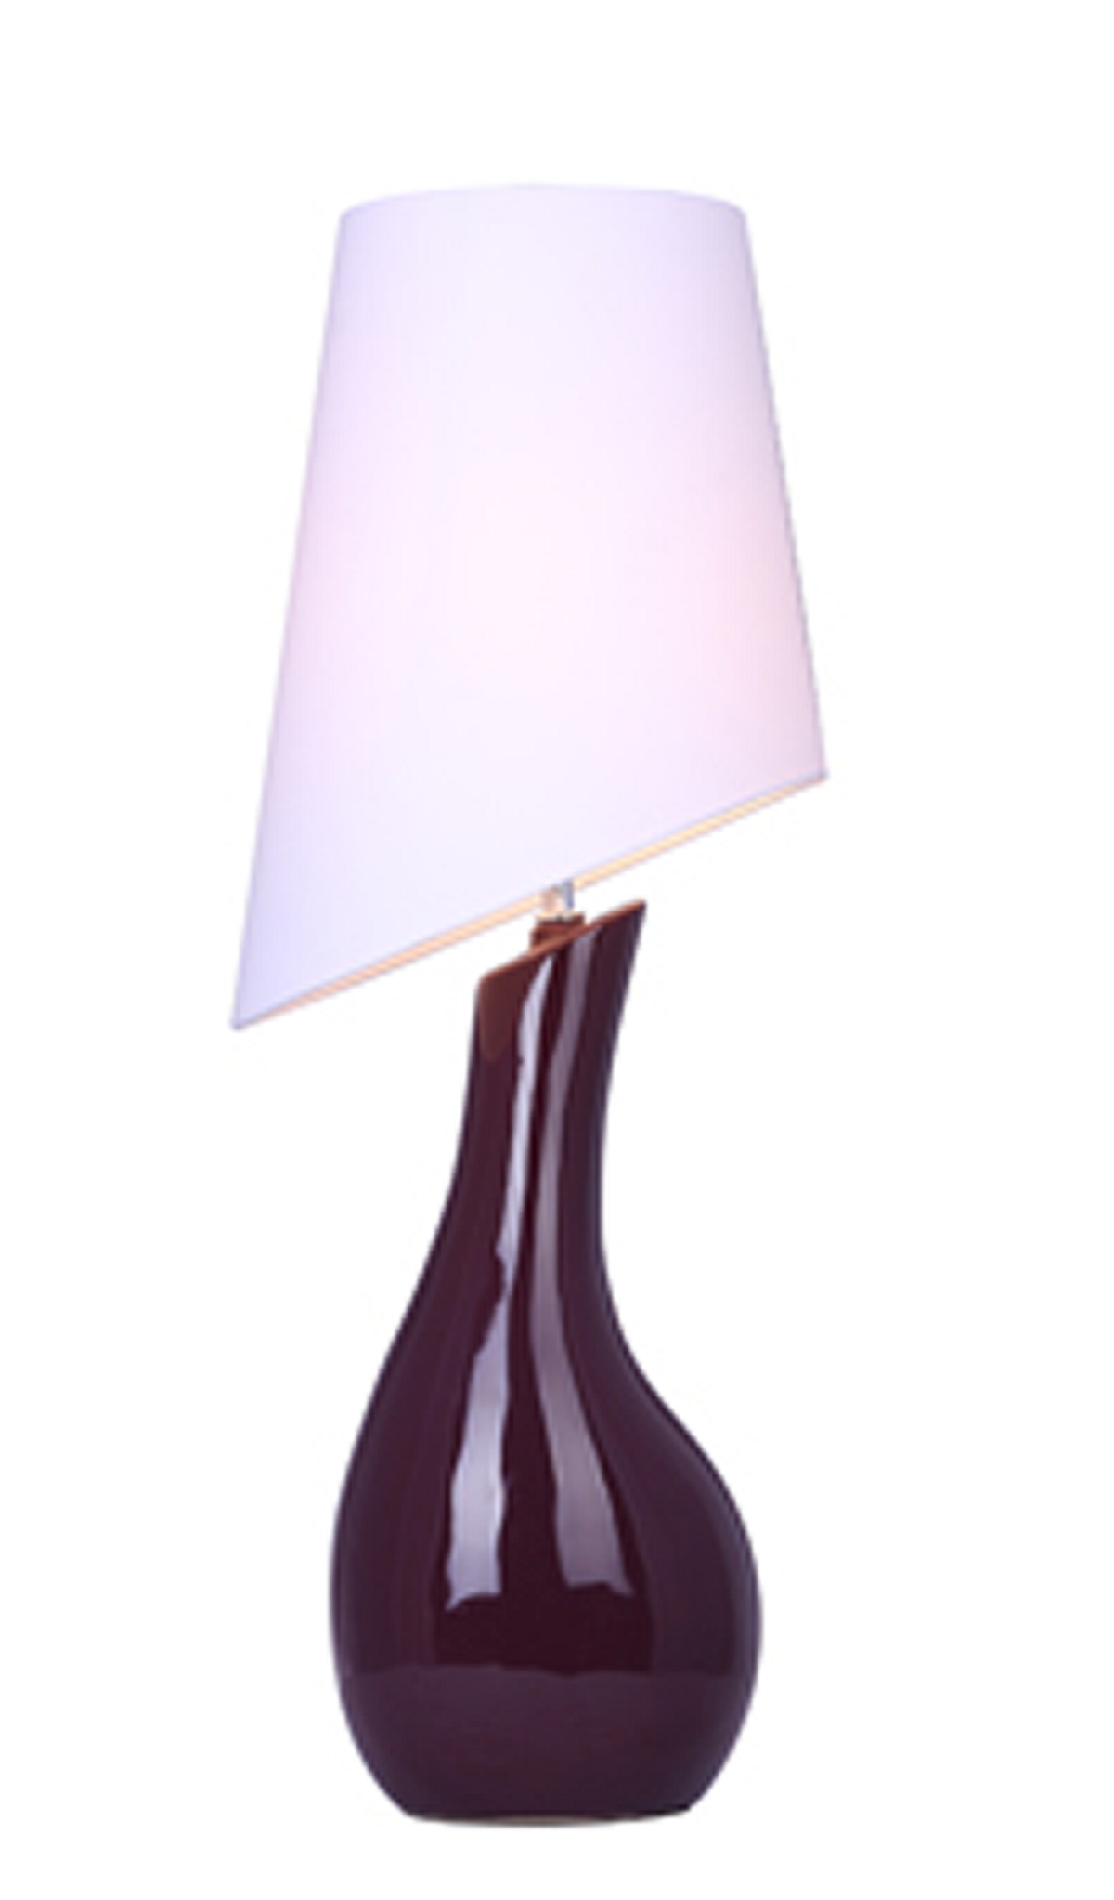 Elegant Designs Curved Purple Ceramic Table Lamp with Asymmetrical White Shade